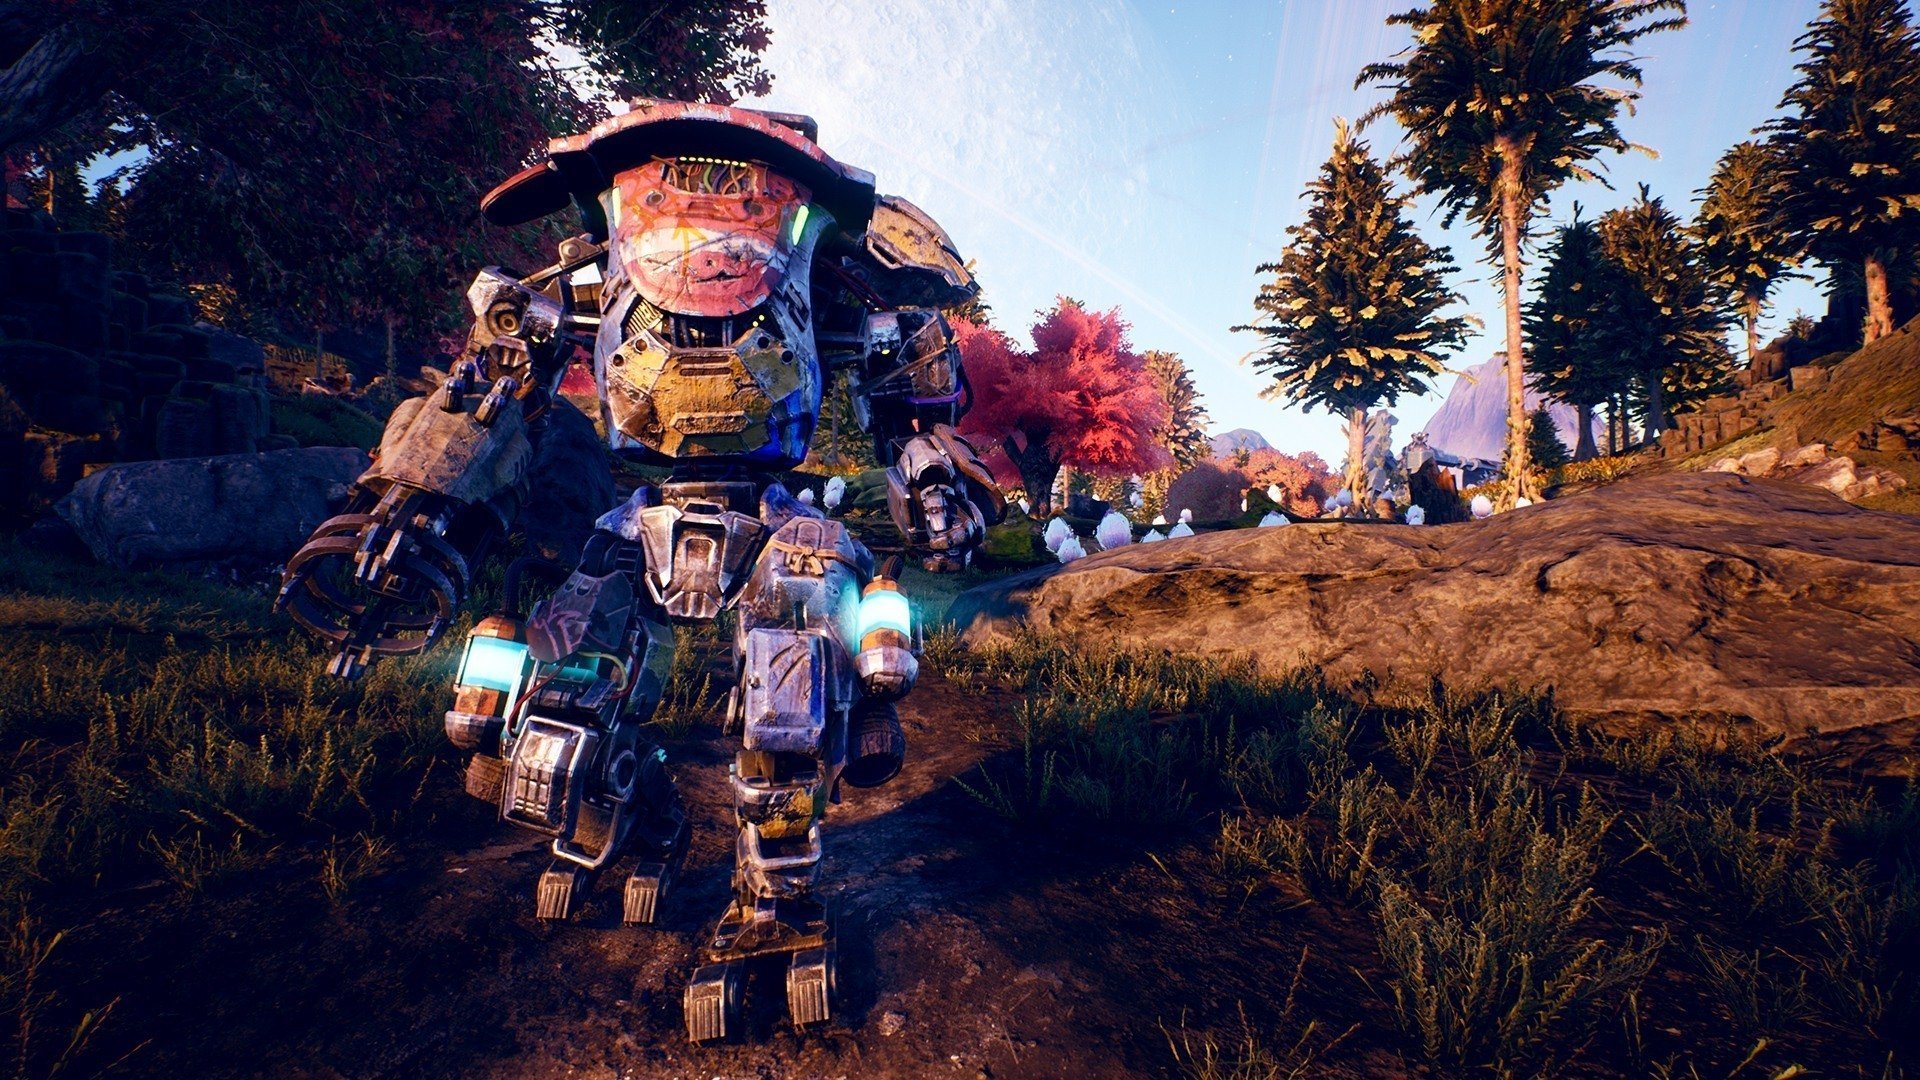 The Outer Worlds mech